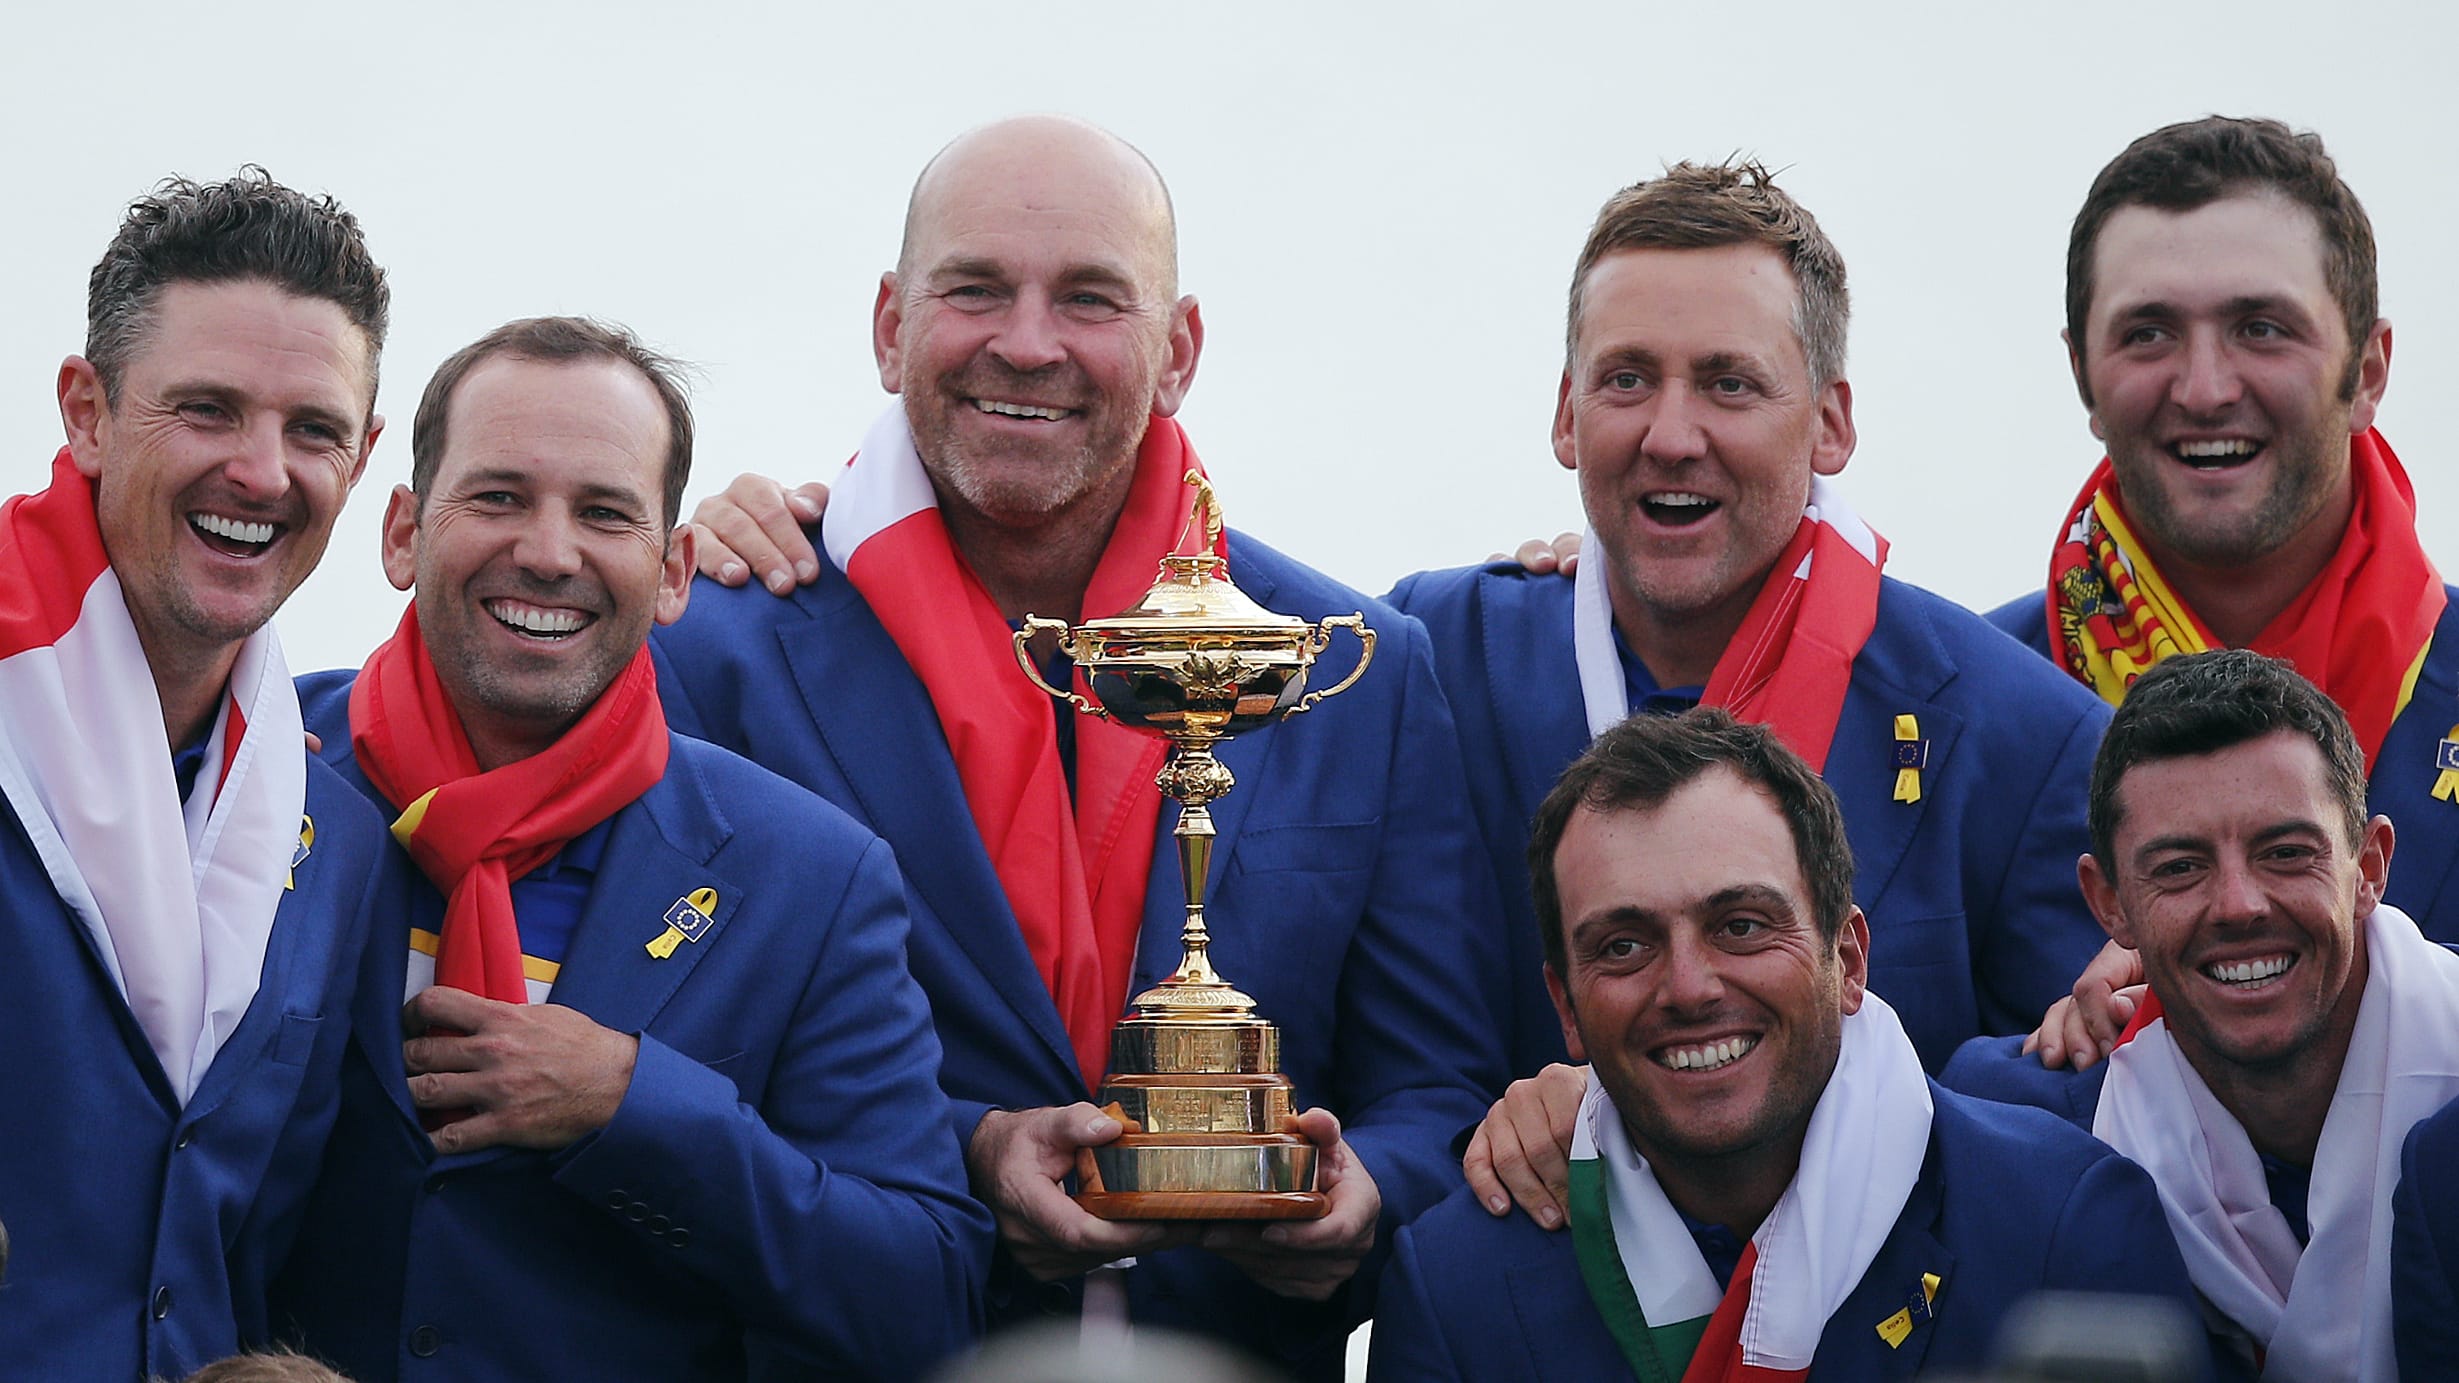 Europe team captain Thomas Bjorn, center, holds the trophy as he celebrates with his team after Europe won the Ryder Cup on the final day of the 42nd Ryder Cup at Le Golf National in Saint-Quentin-en-Yvelines, outside Paris, France, Sunday, Sept. 30, 2018.